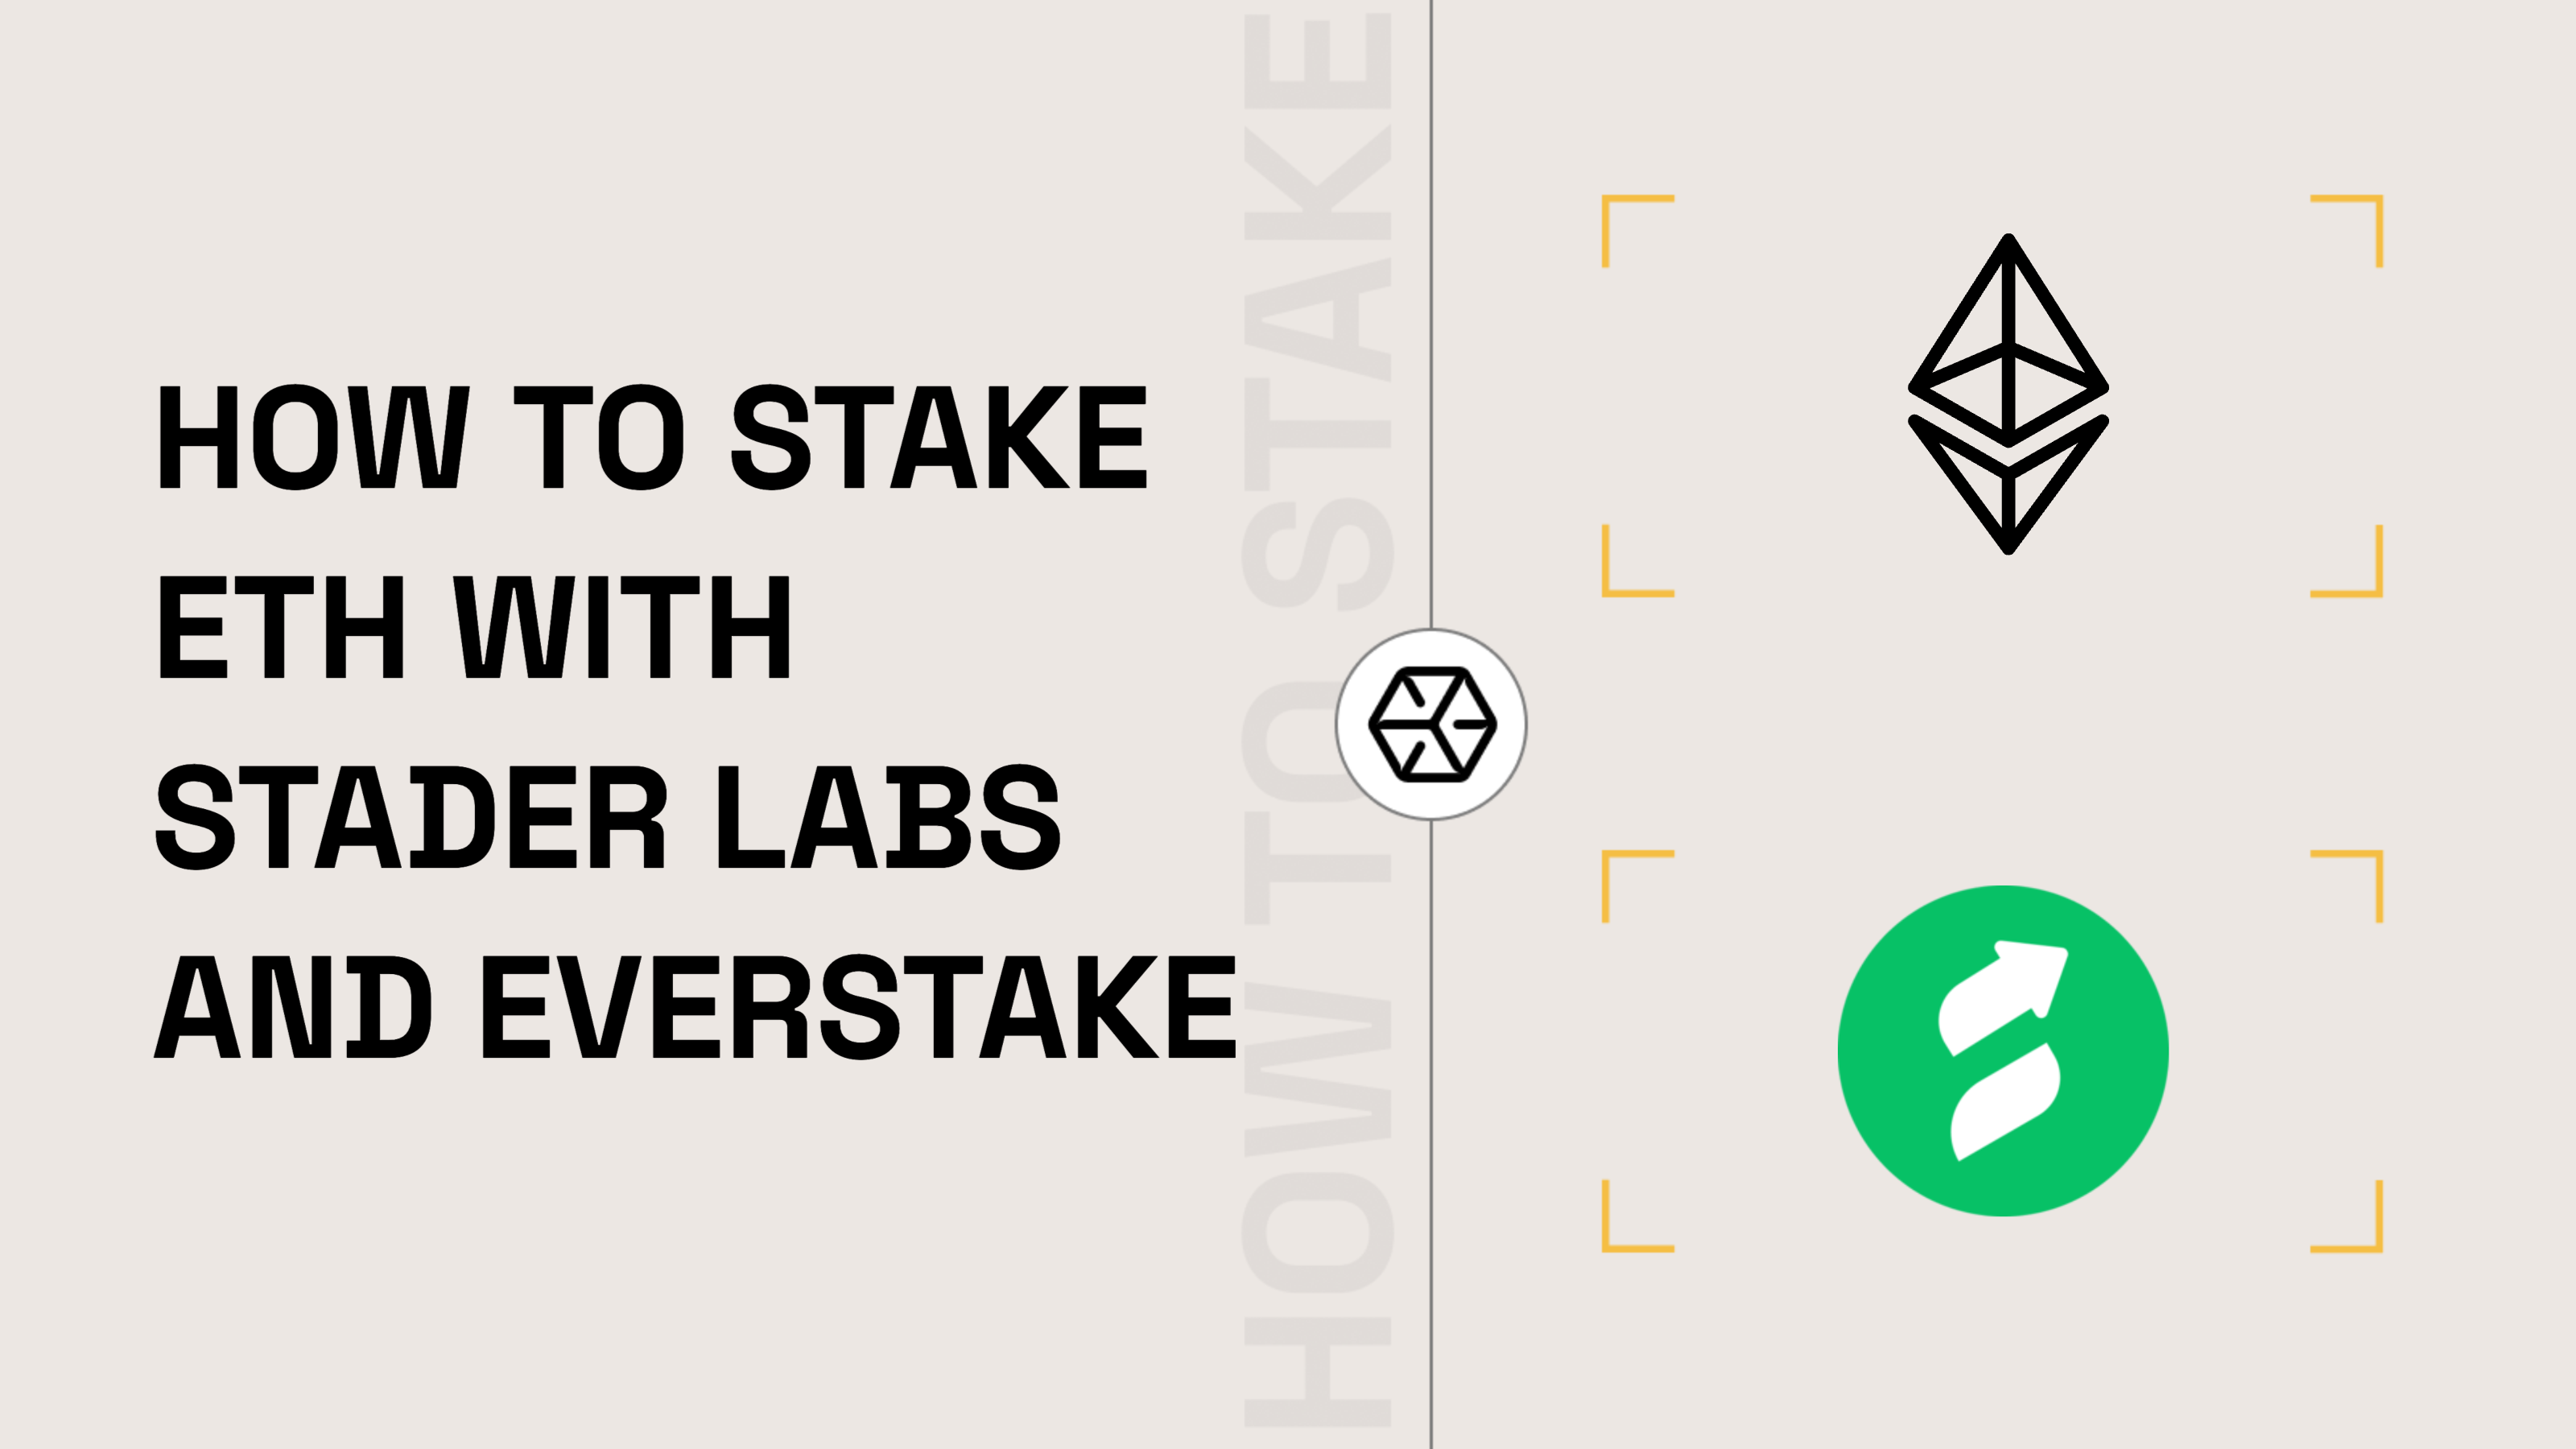 How to Stake ETH with Stader Labs and Everstake